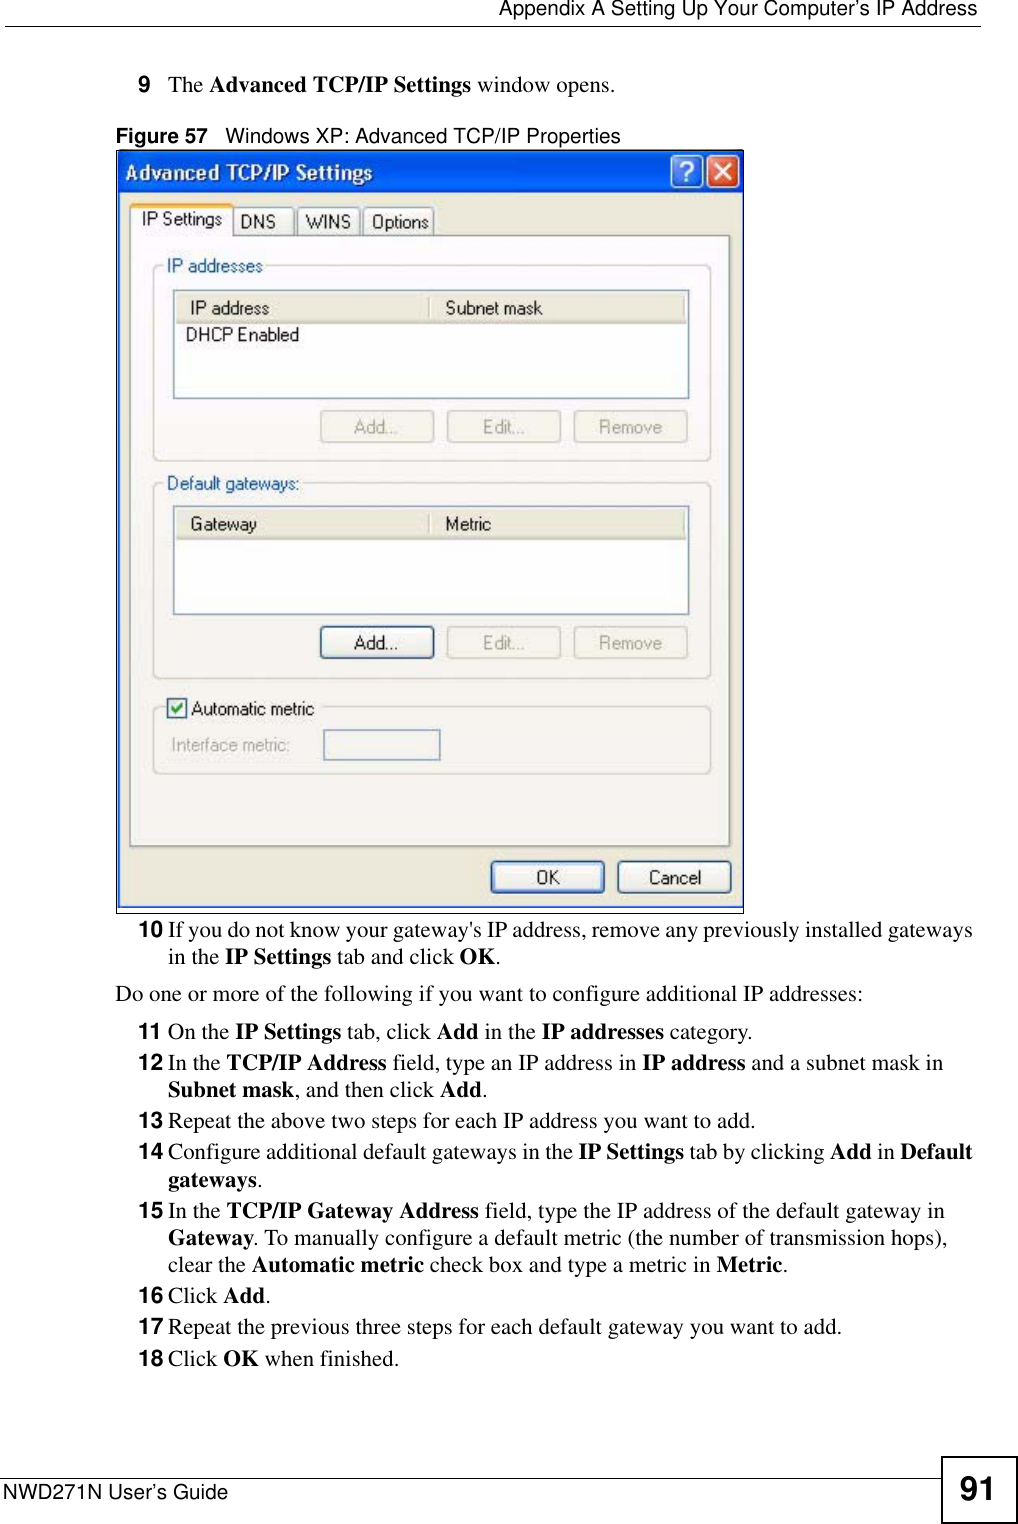  Appendix A Setting Up Your Computer’s IP AddressNWD271N User’s Guide 919The Advanced TCP/IP Settings window opens.Figure 57   Windows XP: Advanced TCP/IP Properties10 If you do not know your gateway&apos;s IP address, remove any previously installed gateways in the IP Settings tab and click OK.Do one or more of the following if you want to configure additional IP addresses:11 On the IP Settings tab, click Add in the IP addresses category.12 In the TCP/IP Address field, type an IP address in IP address and a subnet mask in Subnet mask, and then click Add.13 Repeat the above two steps for each IP address you want to add.14 Configure additional default gateways in the IP Settings tab by clicking Add in Default gateways.15 In the TCP/IP Gateway Address field, type the IP address of the default gateway in Gateway. To manually configure a default metric (the number of transmission hops), clear the Automatic metric check box and type a metric in Metric.16 Click Add. 17 Repeat the previous three steps for each default gateway you want to add.18 Click OK when finished.